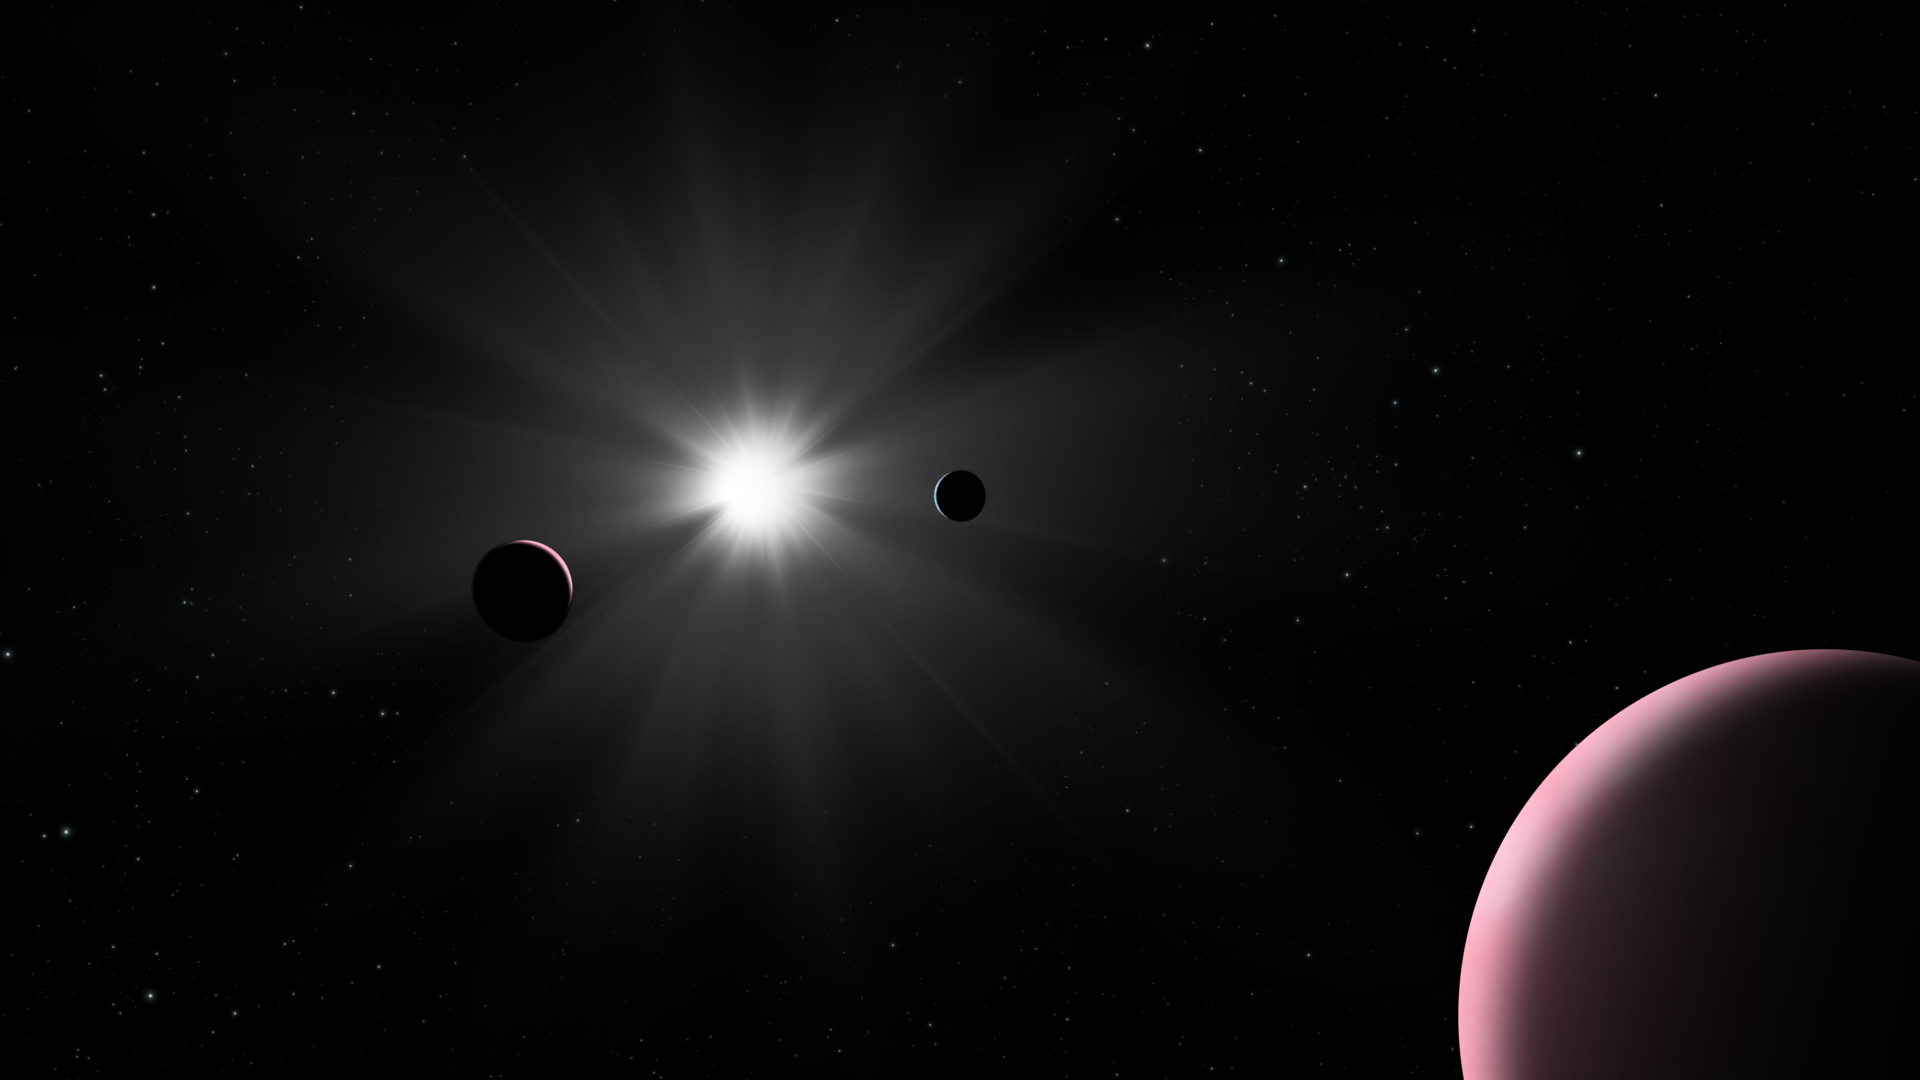 Artist’s impression of the Nu2 Lupi planetary system